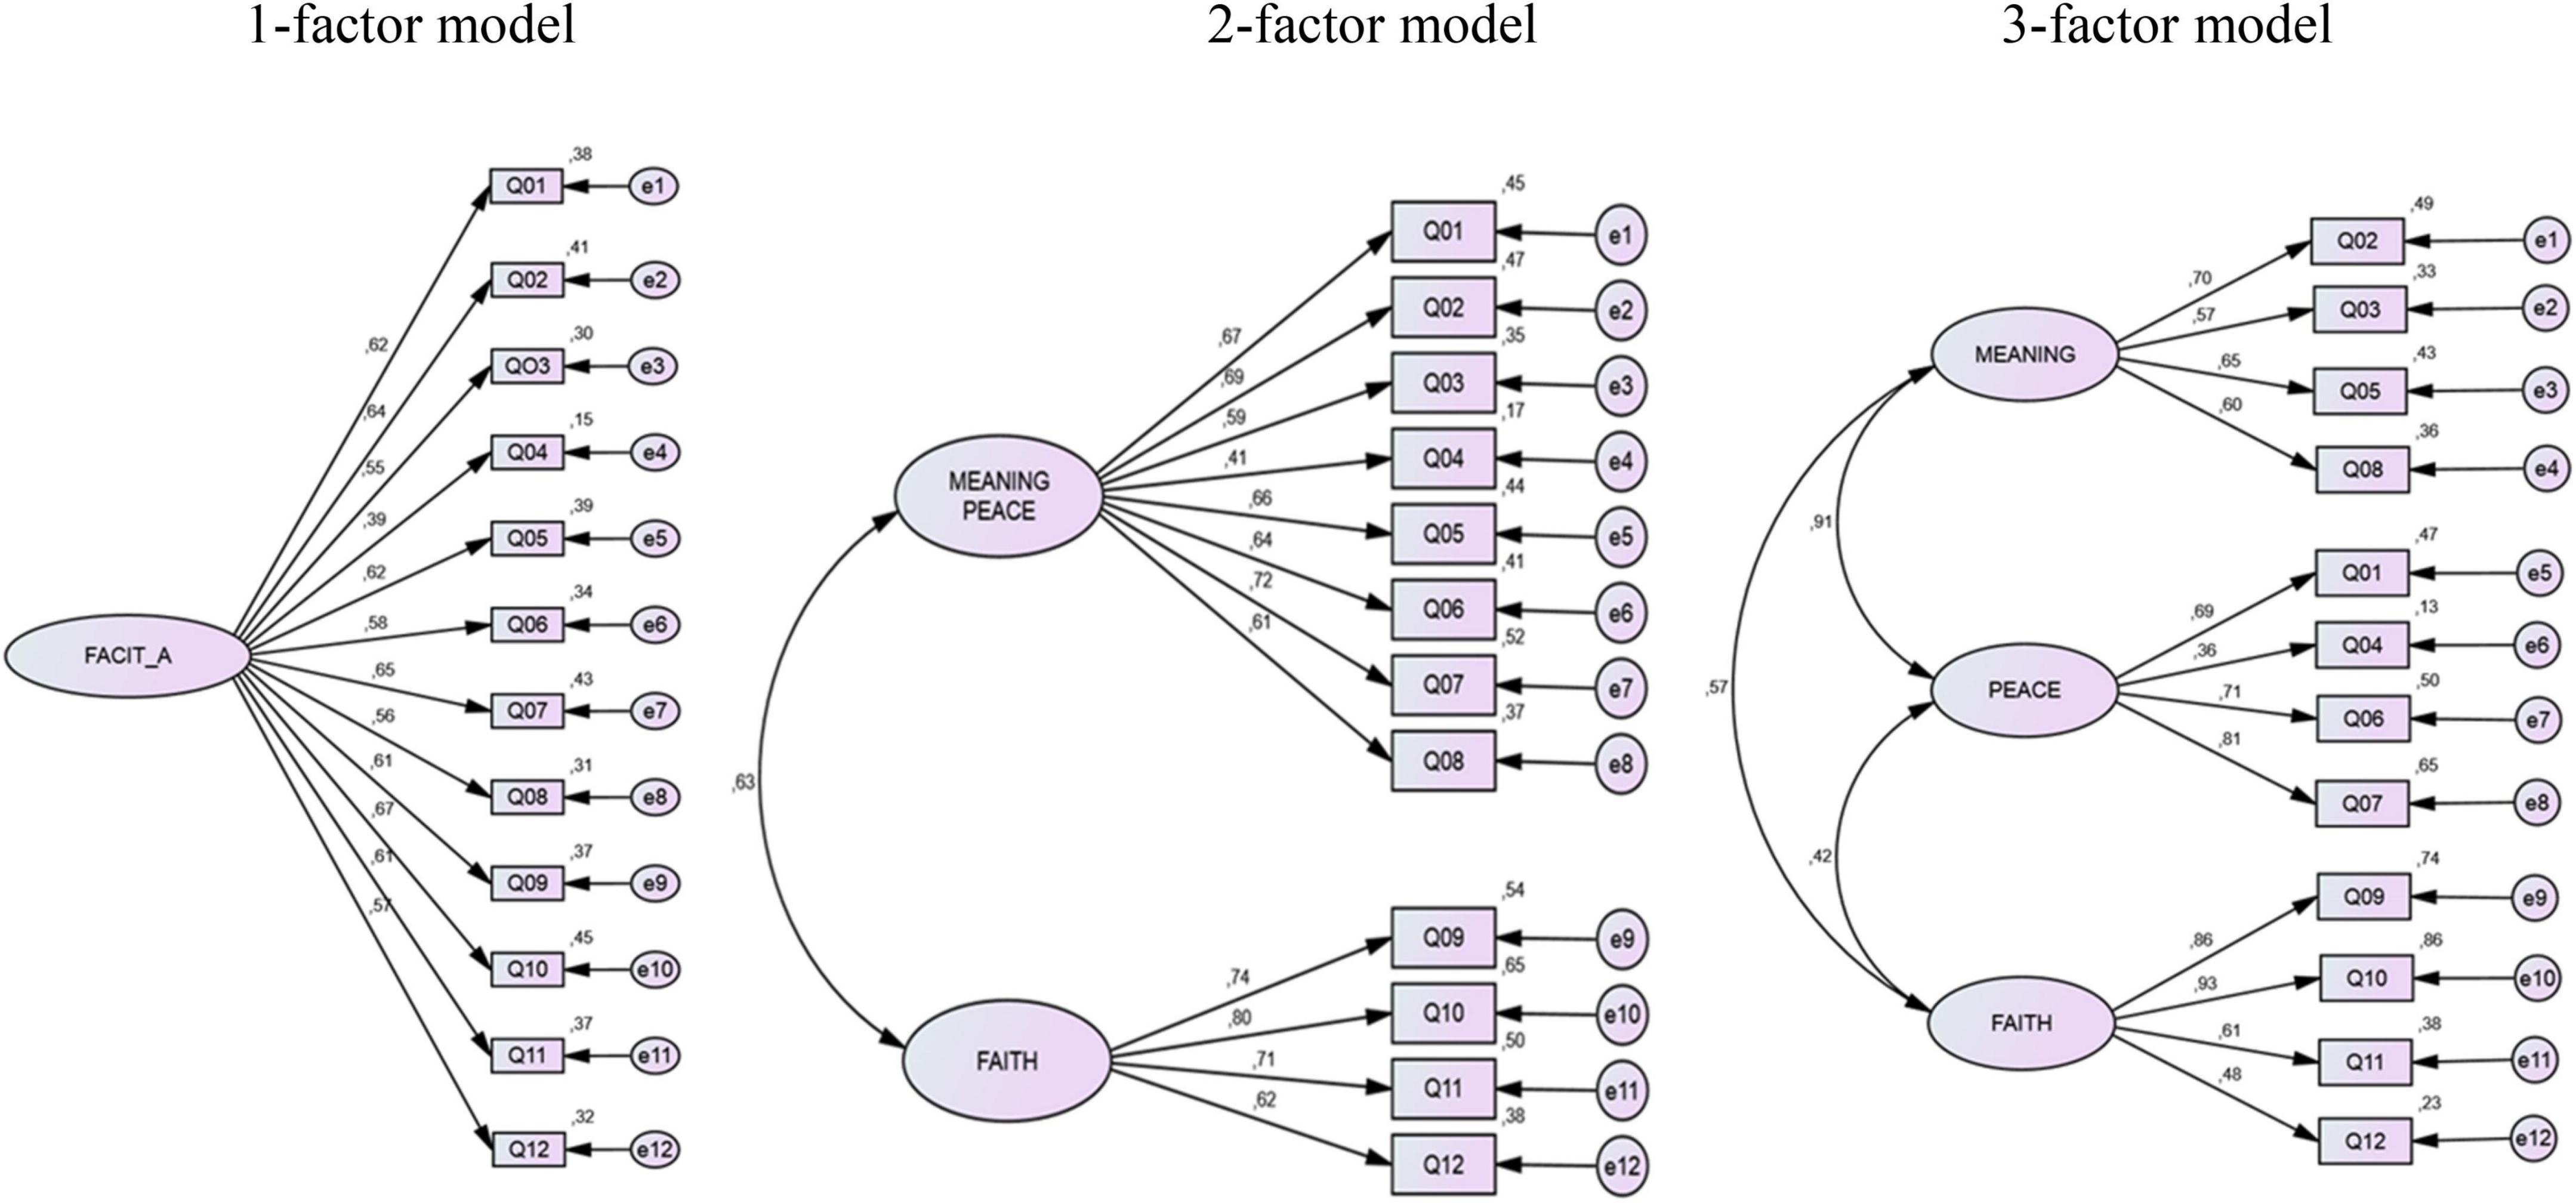 Full article: A Corrected Goodness-of-Fit Index (CGFI) for Model Evaluation  in Structural Equation Modeling